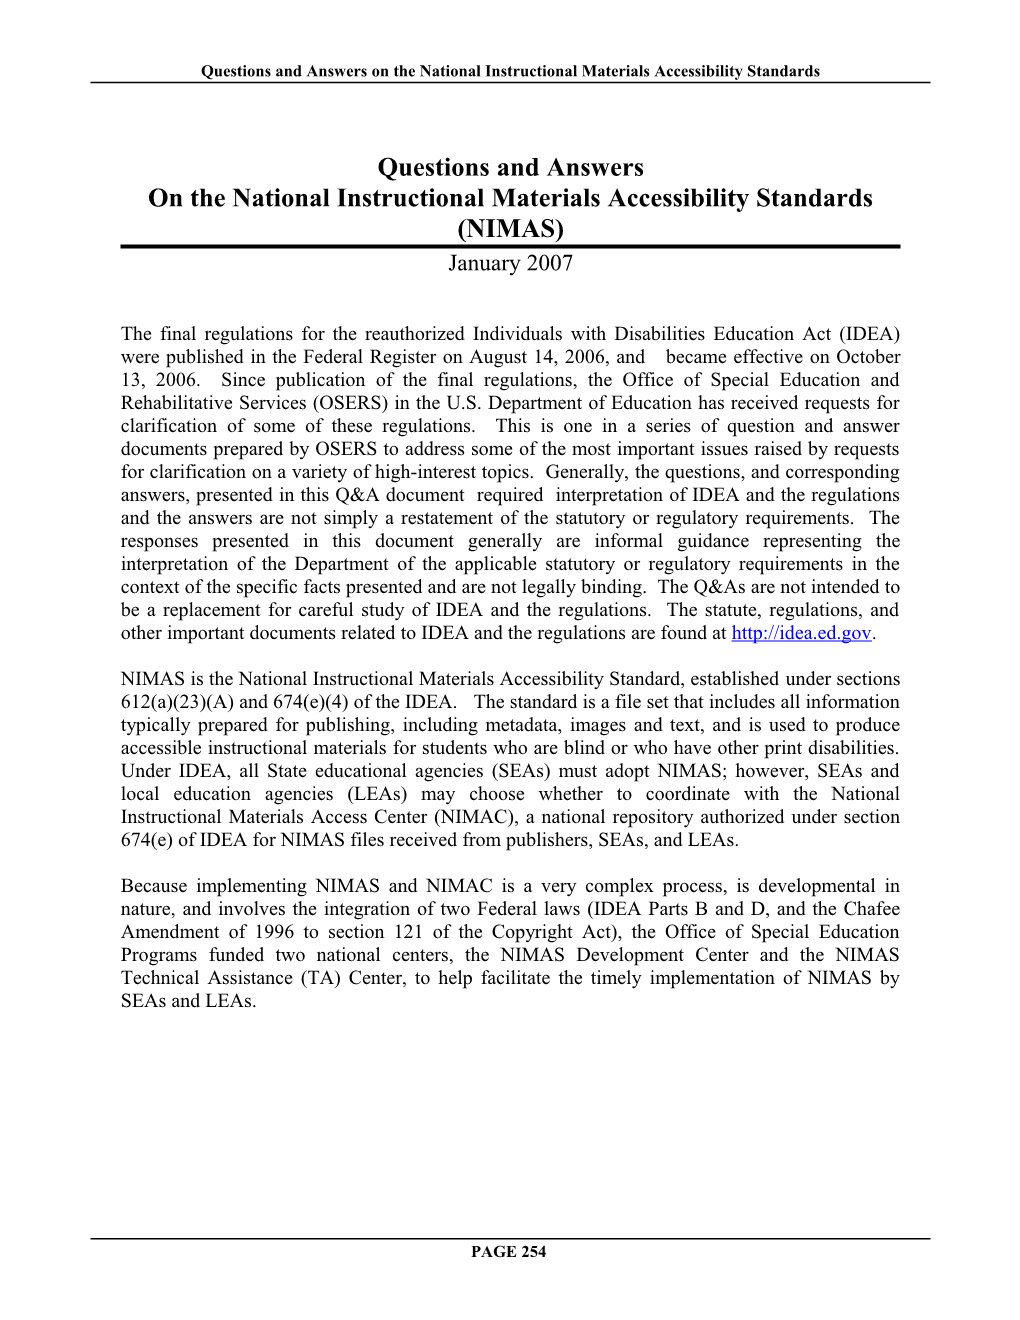 Questions and Answers on the National Instructional Materials Accessibility Standards